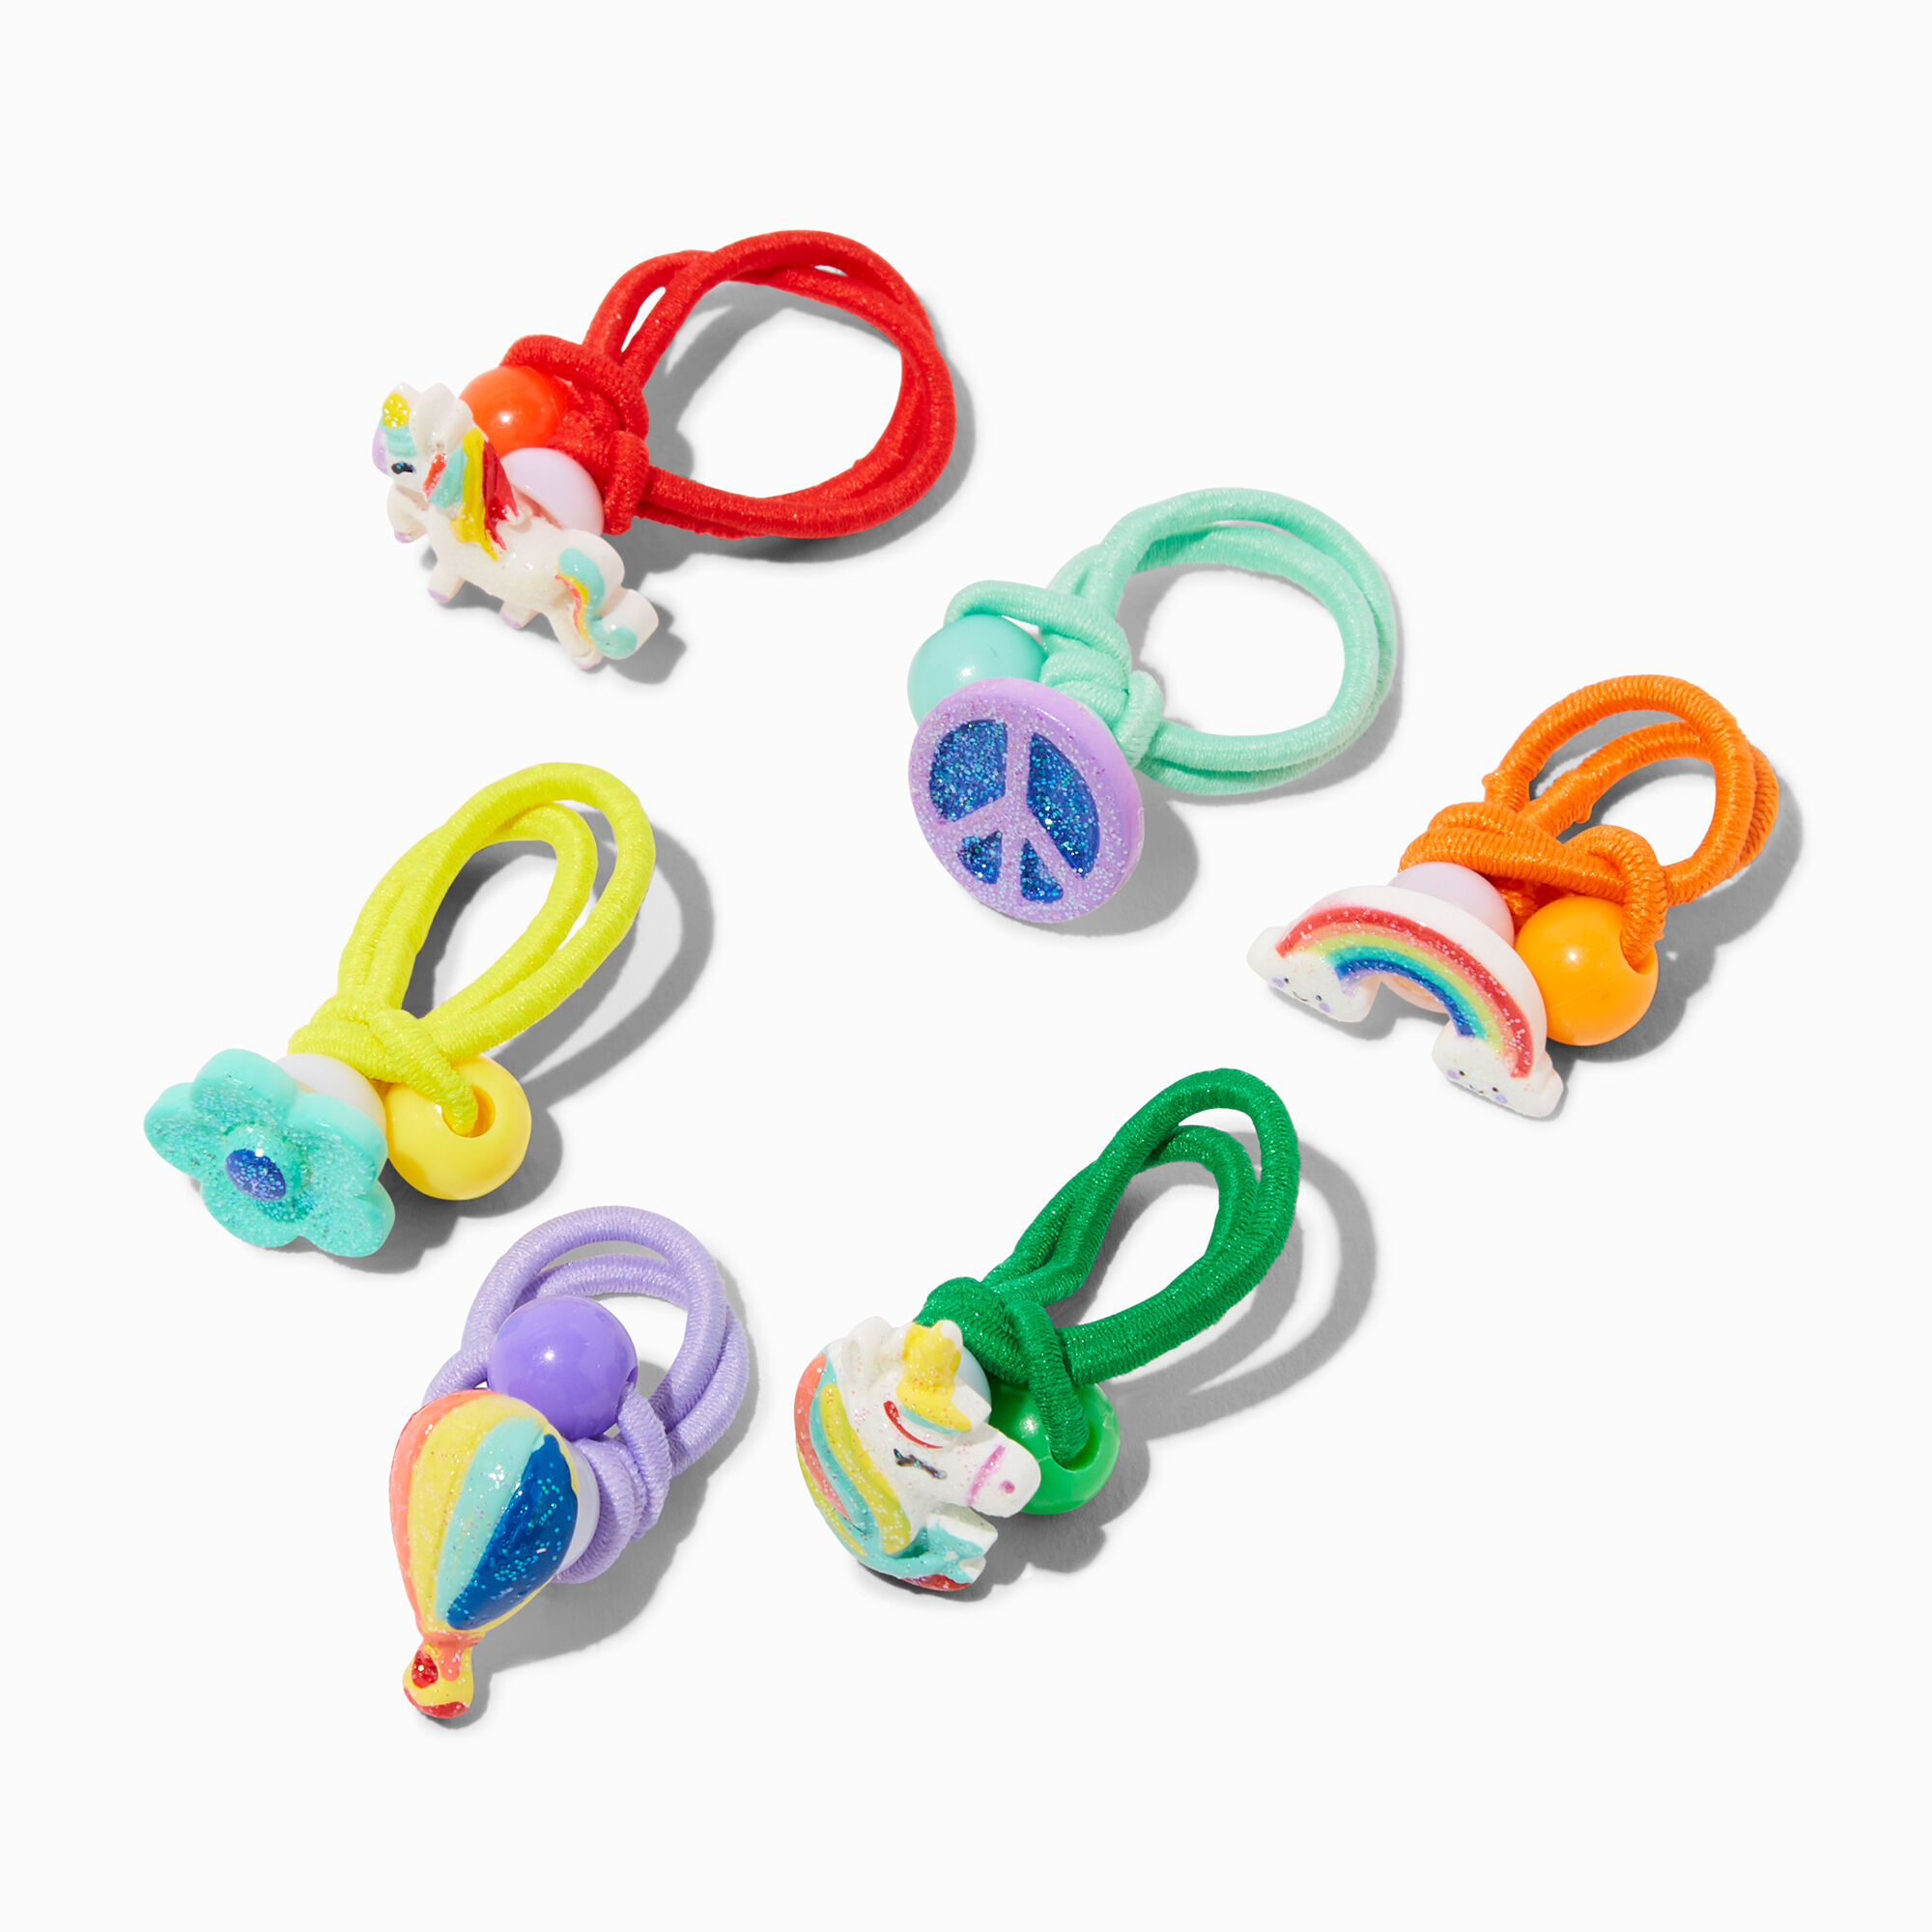 View Claires Club Unicorn Charm Hair Ties 6 Pack Rainbow information